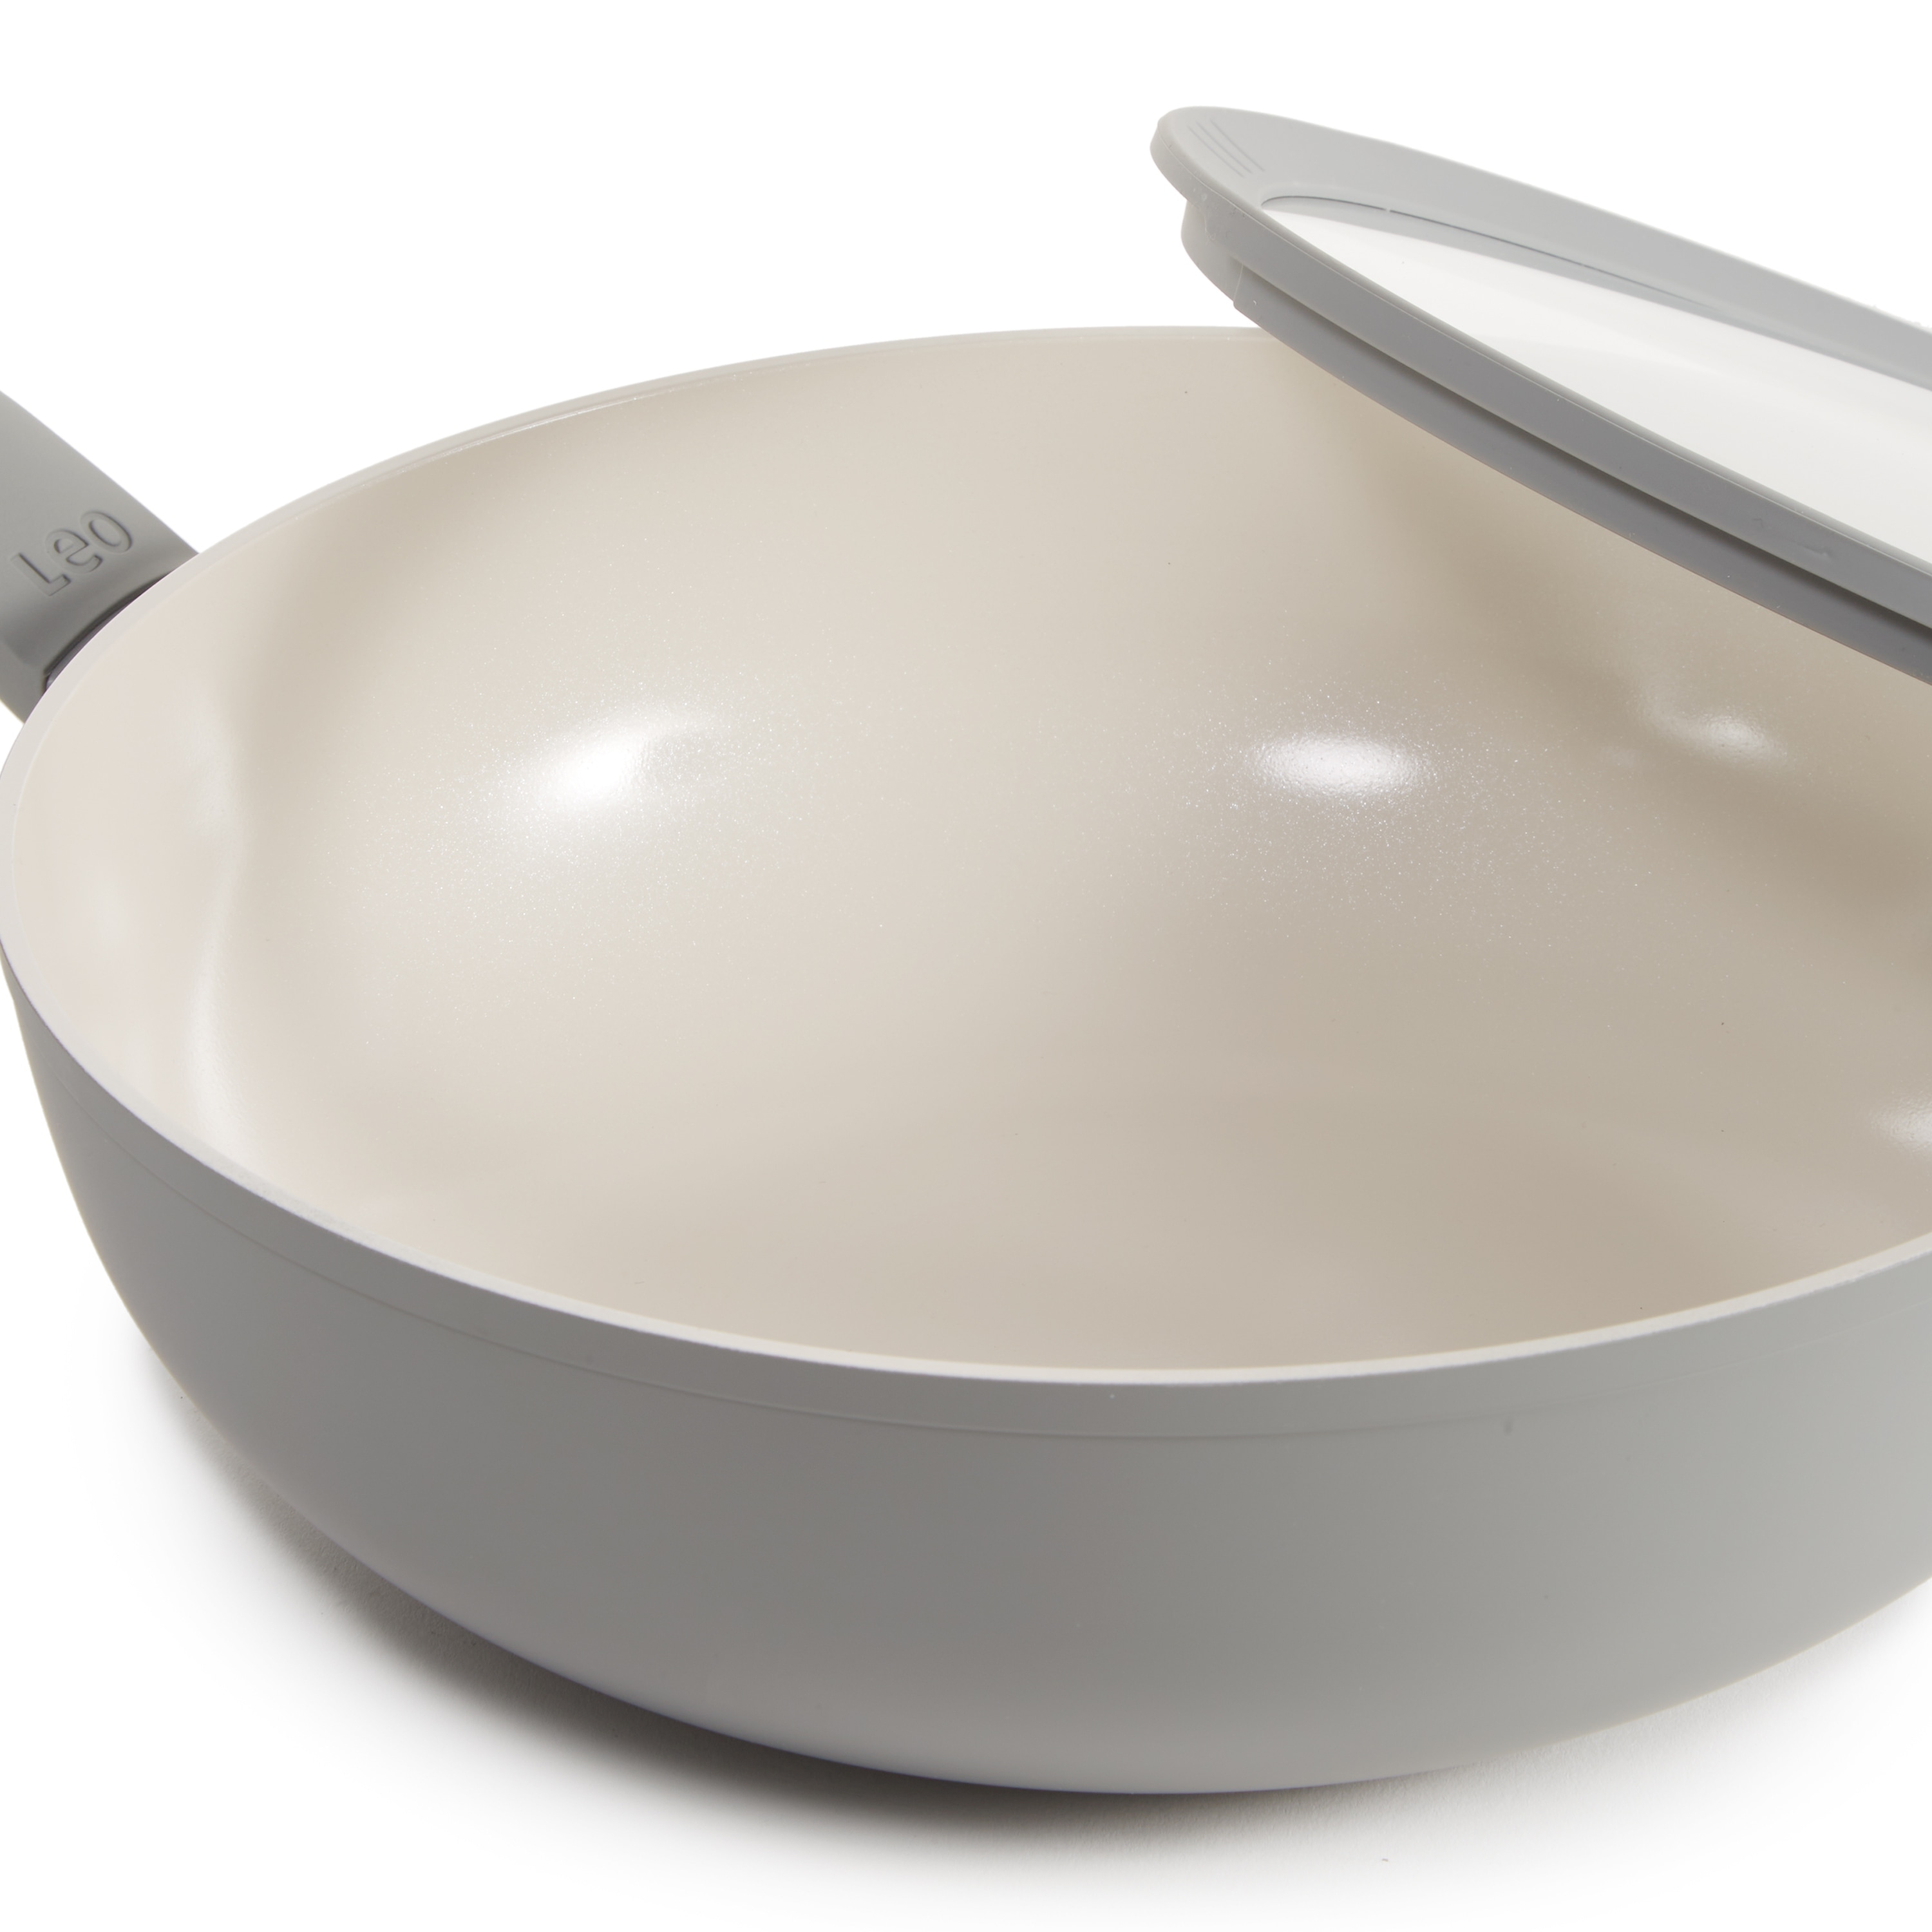 BergHOFF International 11 Non Stick Ceramic Frying Pan with Lid